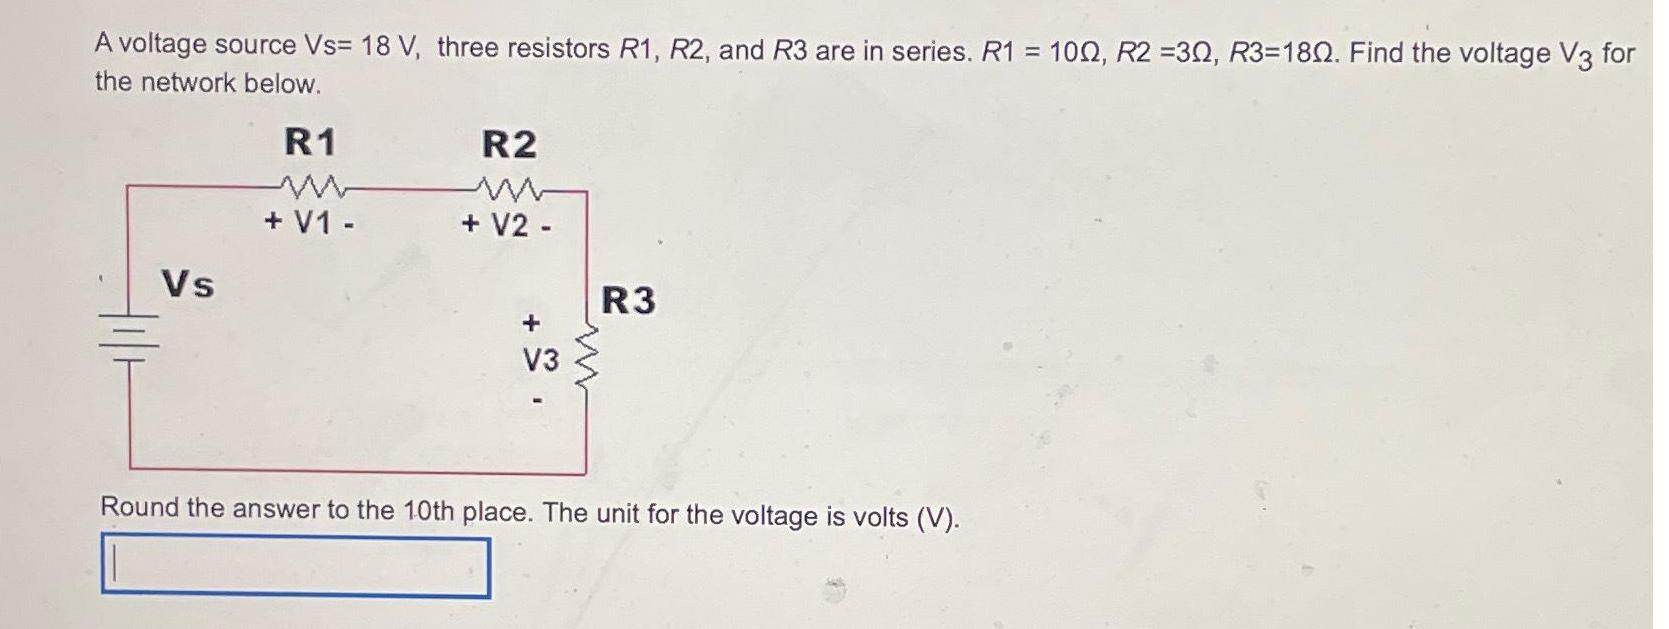 A voltage source Vs= 18 V, three resistors R1, R2, and R3 are in series. R1 = 100, R2 =30, R3-180. Find the